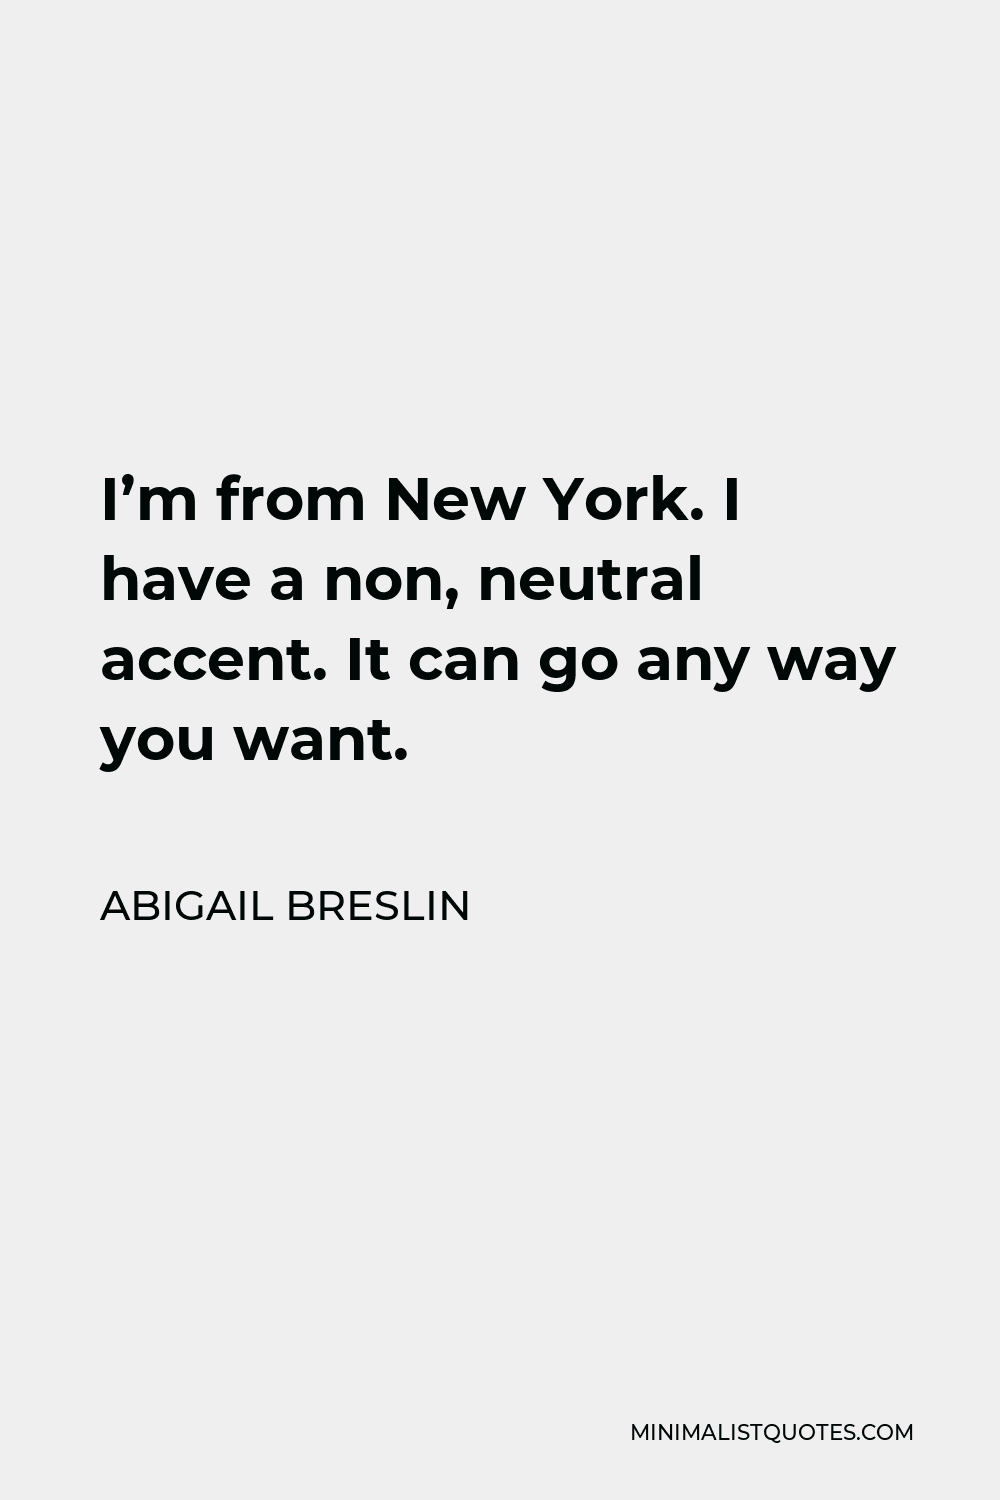 Abigail Breslin Quote - I’m from New York. I have a non, neutral accent. It can go any way you want.